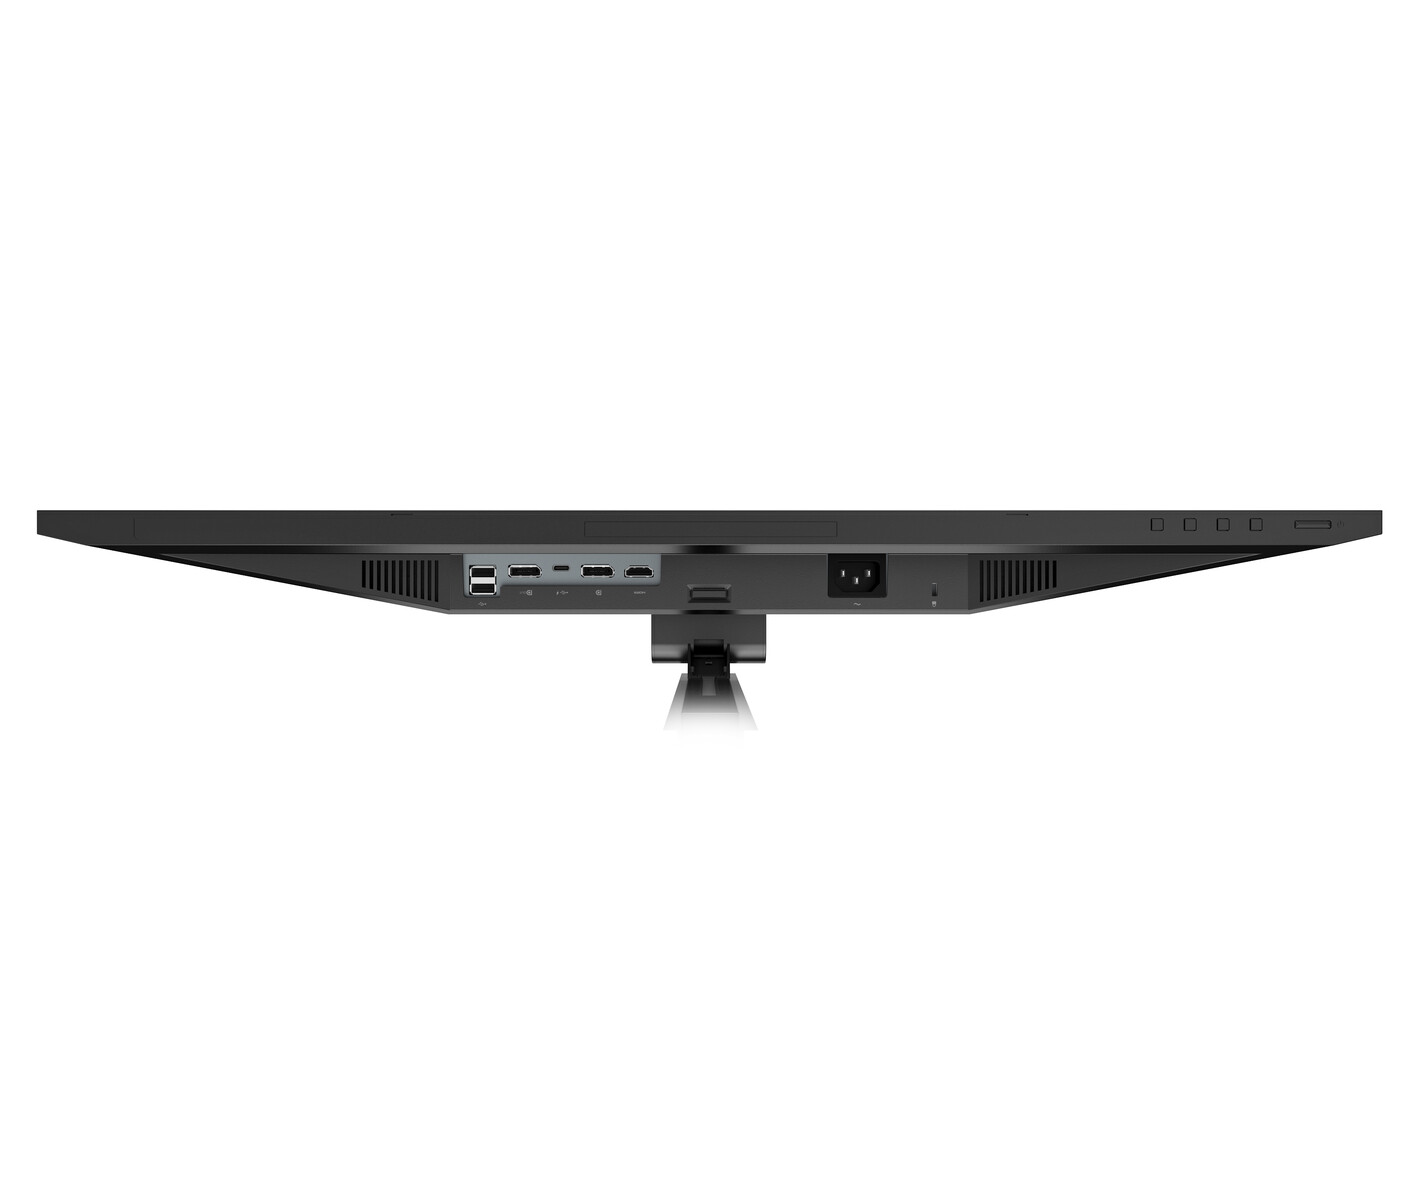 HP announces two new USB-C monitors for enterprise customers - NotebookCheck.net News